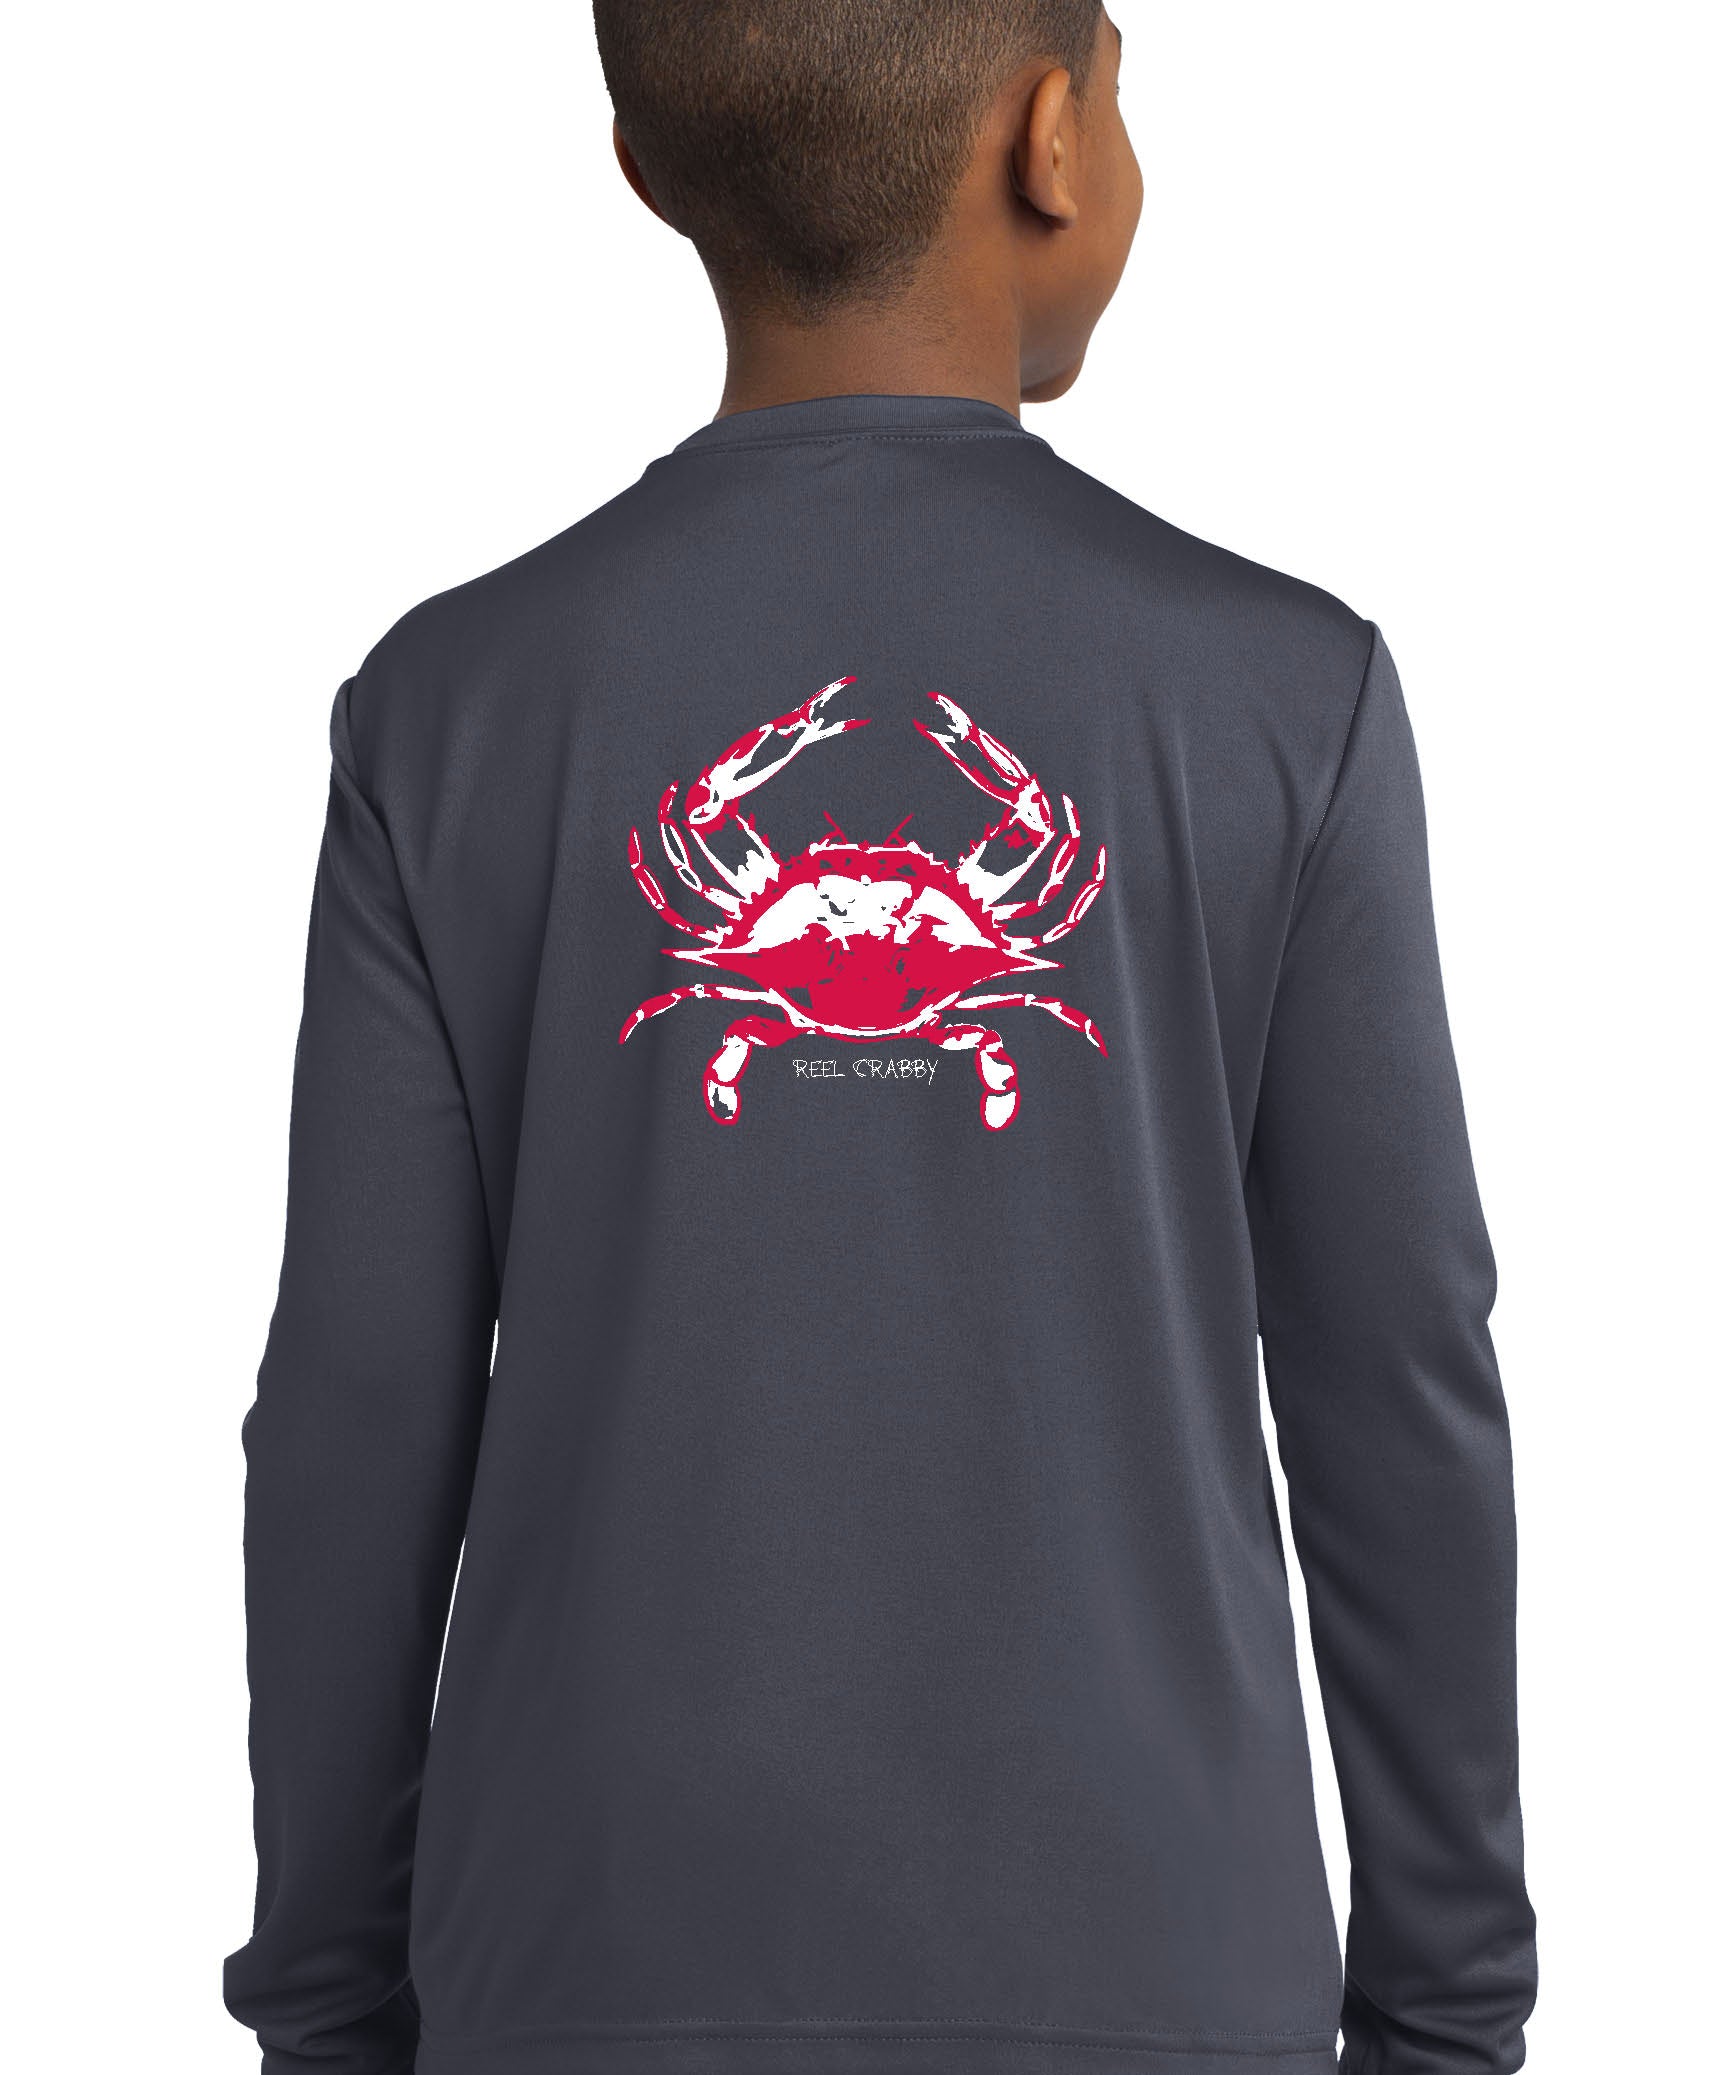 Youth Model in Charcoal Crab "Reel Crabby" Long Sleeve Performance Dry-Fit Shirts with Sun Protection by Reel Fishy Apparel